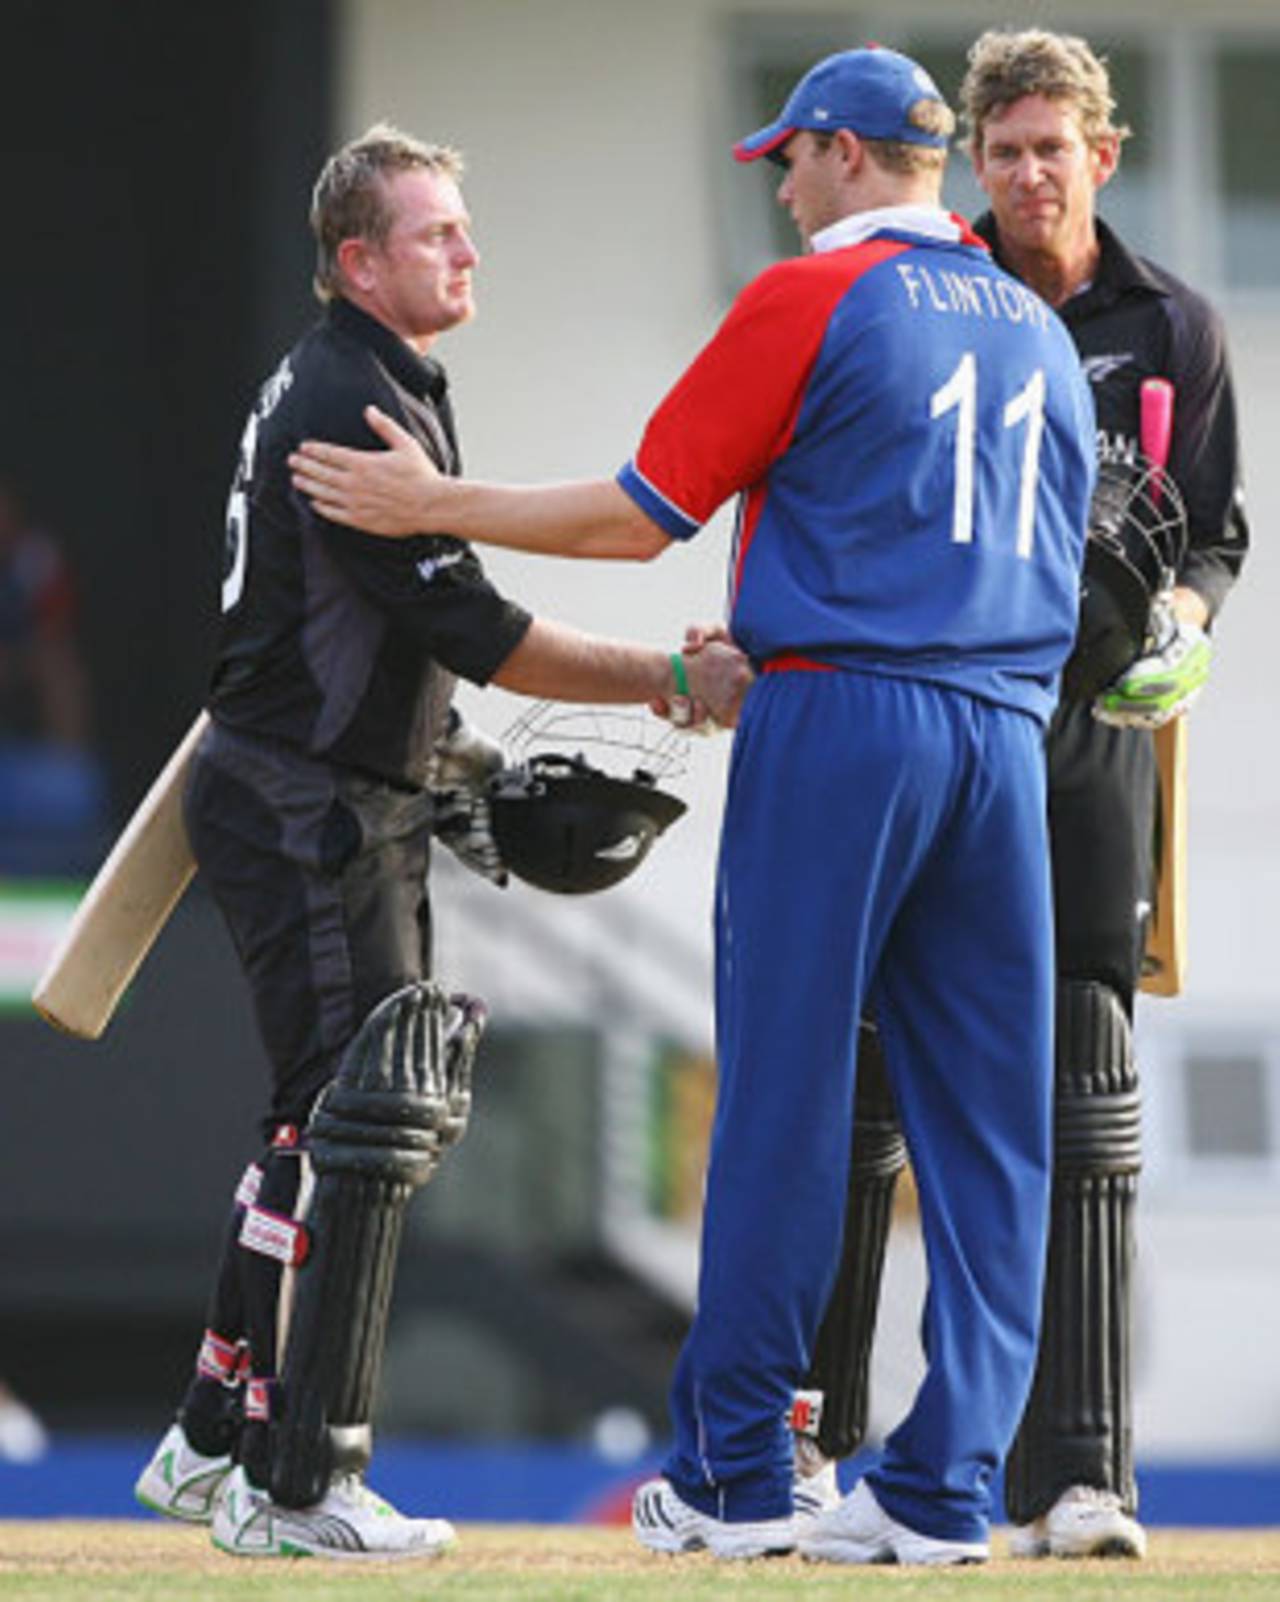 Andrew Flintoff congratulates Jacob Oram and Scott Styris on New Zealand's win, England v New Zealand, Group C, St Lucia, March 16, 2007